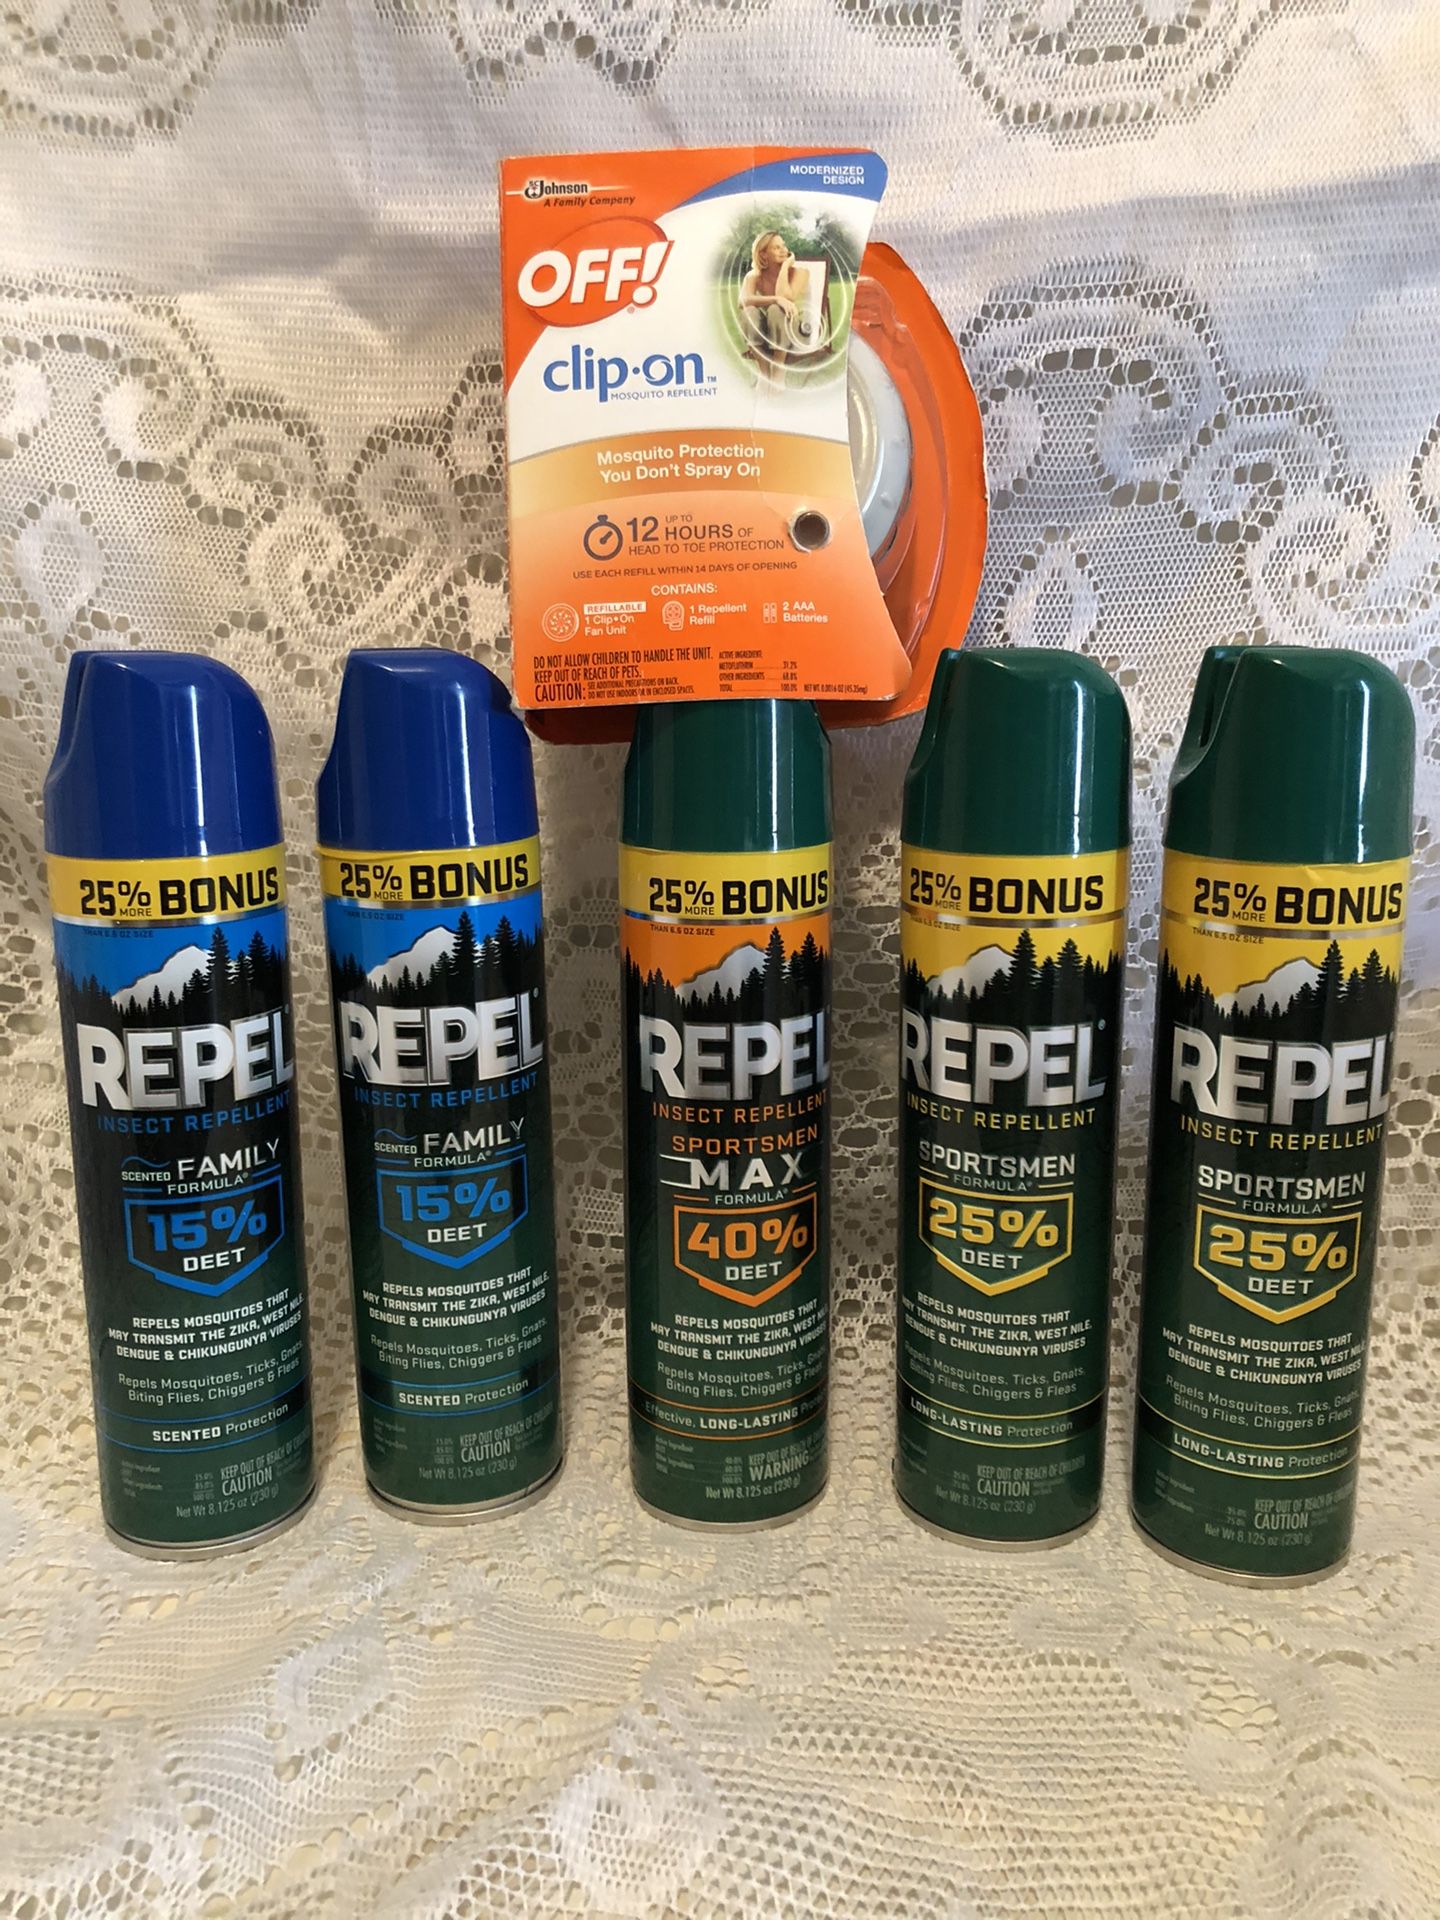 Outdoor repellent, spray and clip on.